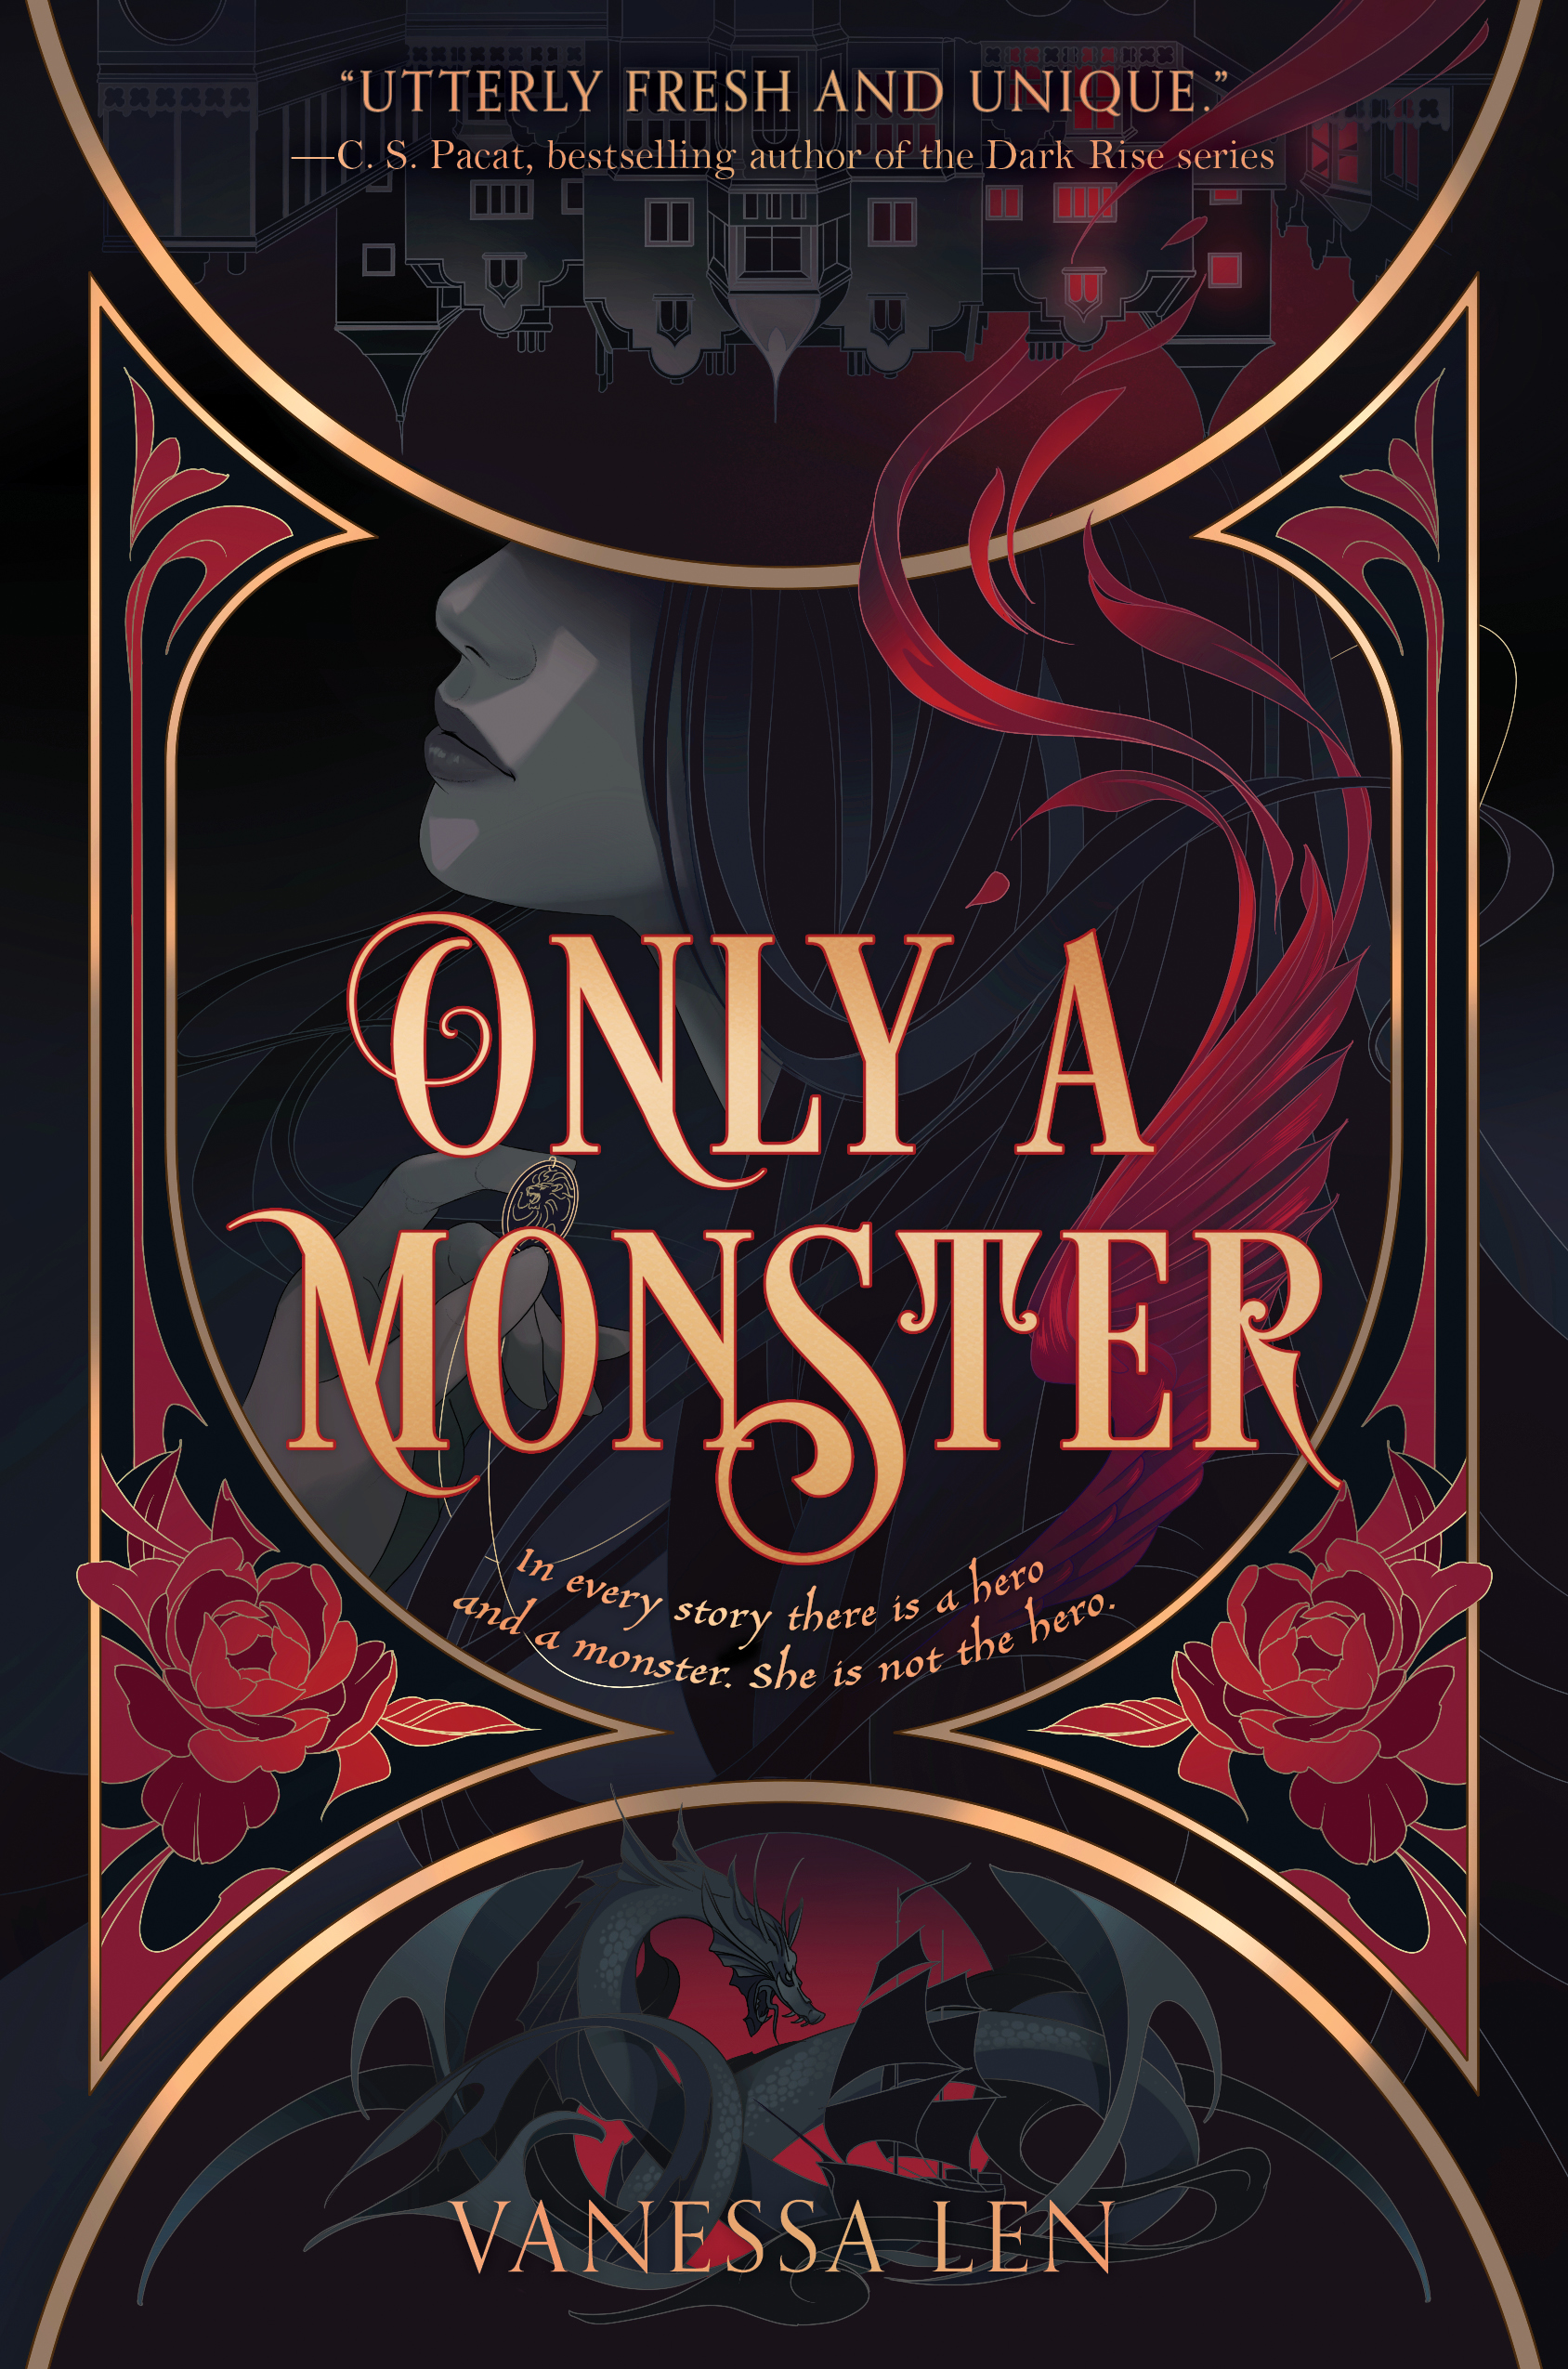 Only a Monster book jacket